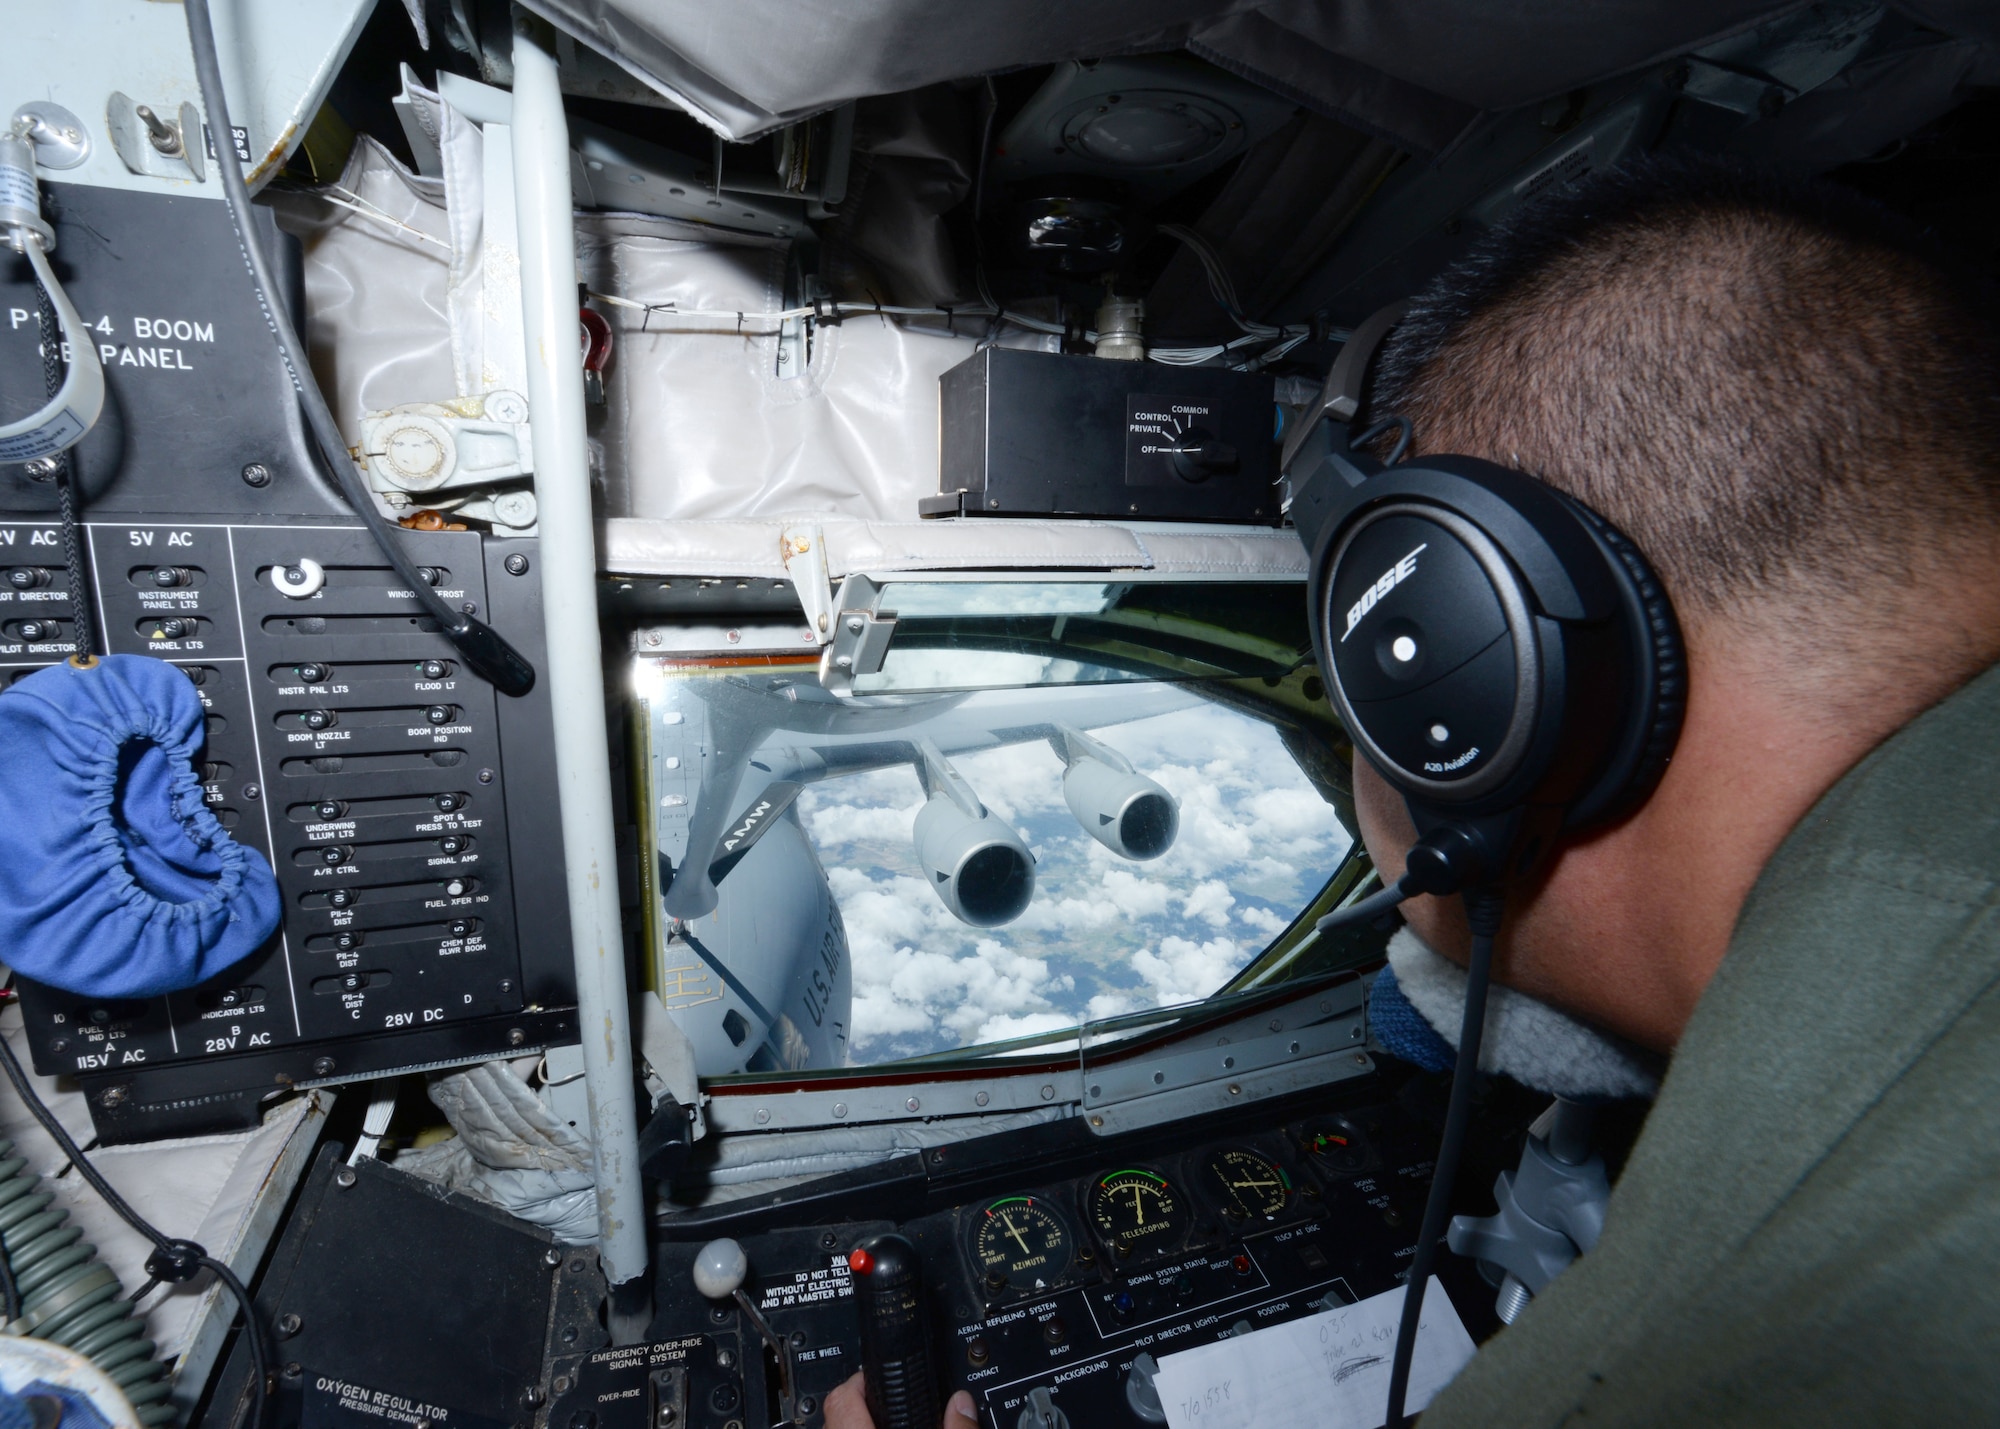 U.S. Air Force Master Sgt. Rob Miller, 97th Training Squadron evaluator boom operator, operates the boom to fuel a nearby C-17 Globemaster III over Texas, Aug. 31, 2016.This was the 60th anniversary flight of the KC-135 that has provided long-range aerial refueling support for Air Force, Navy, Marine Corps and allied aircraft for years.